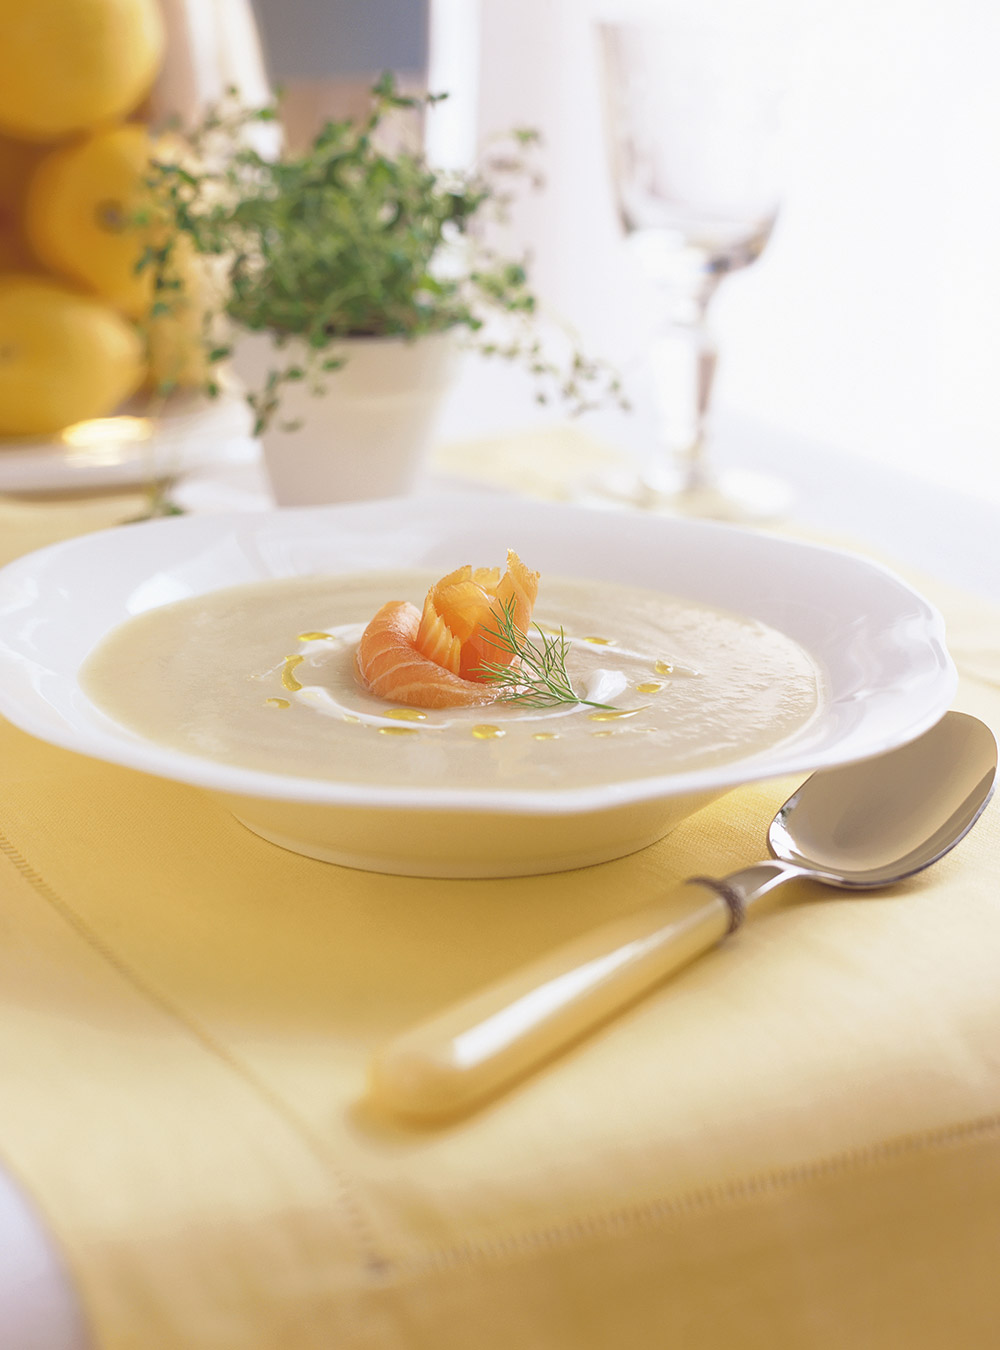 Cream of Fennel Soup with Smoked Salmon